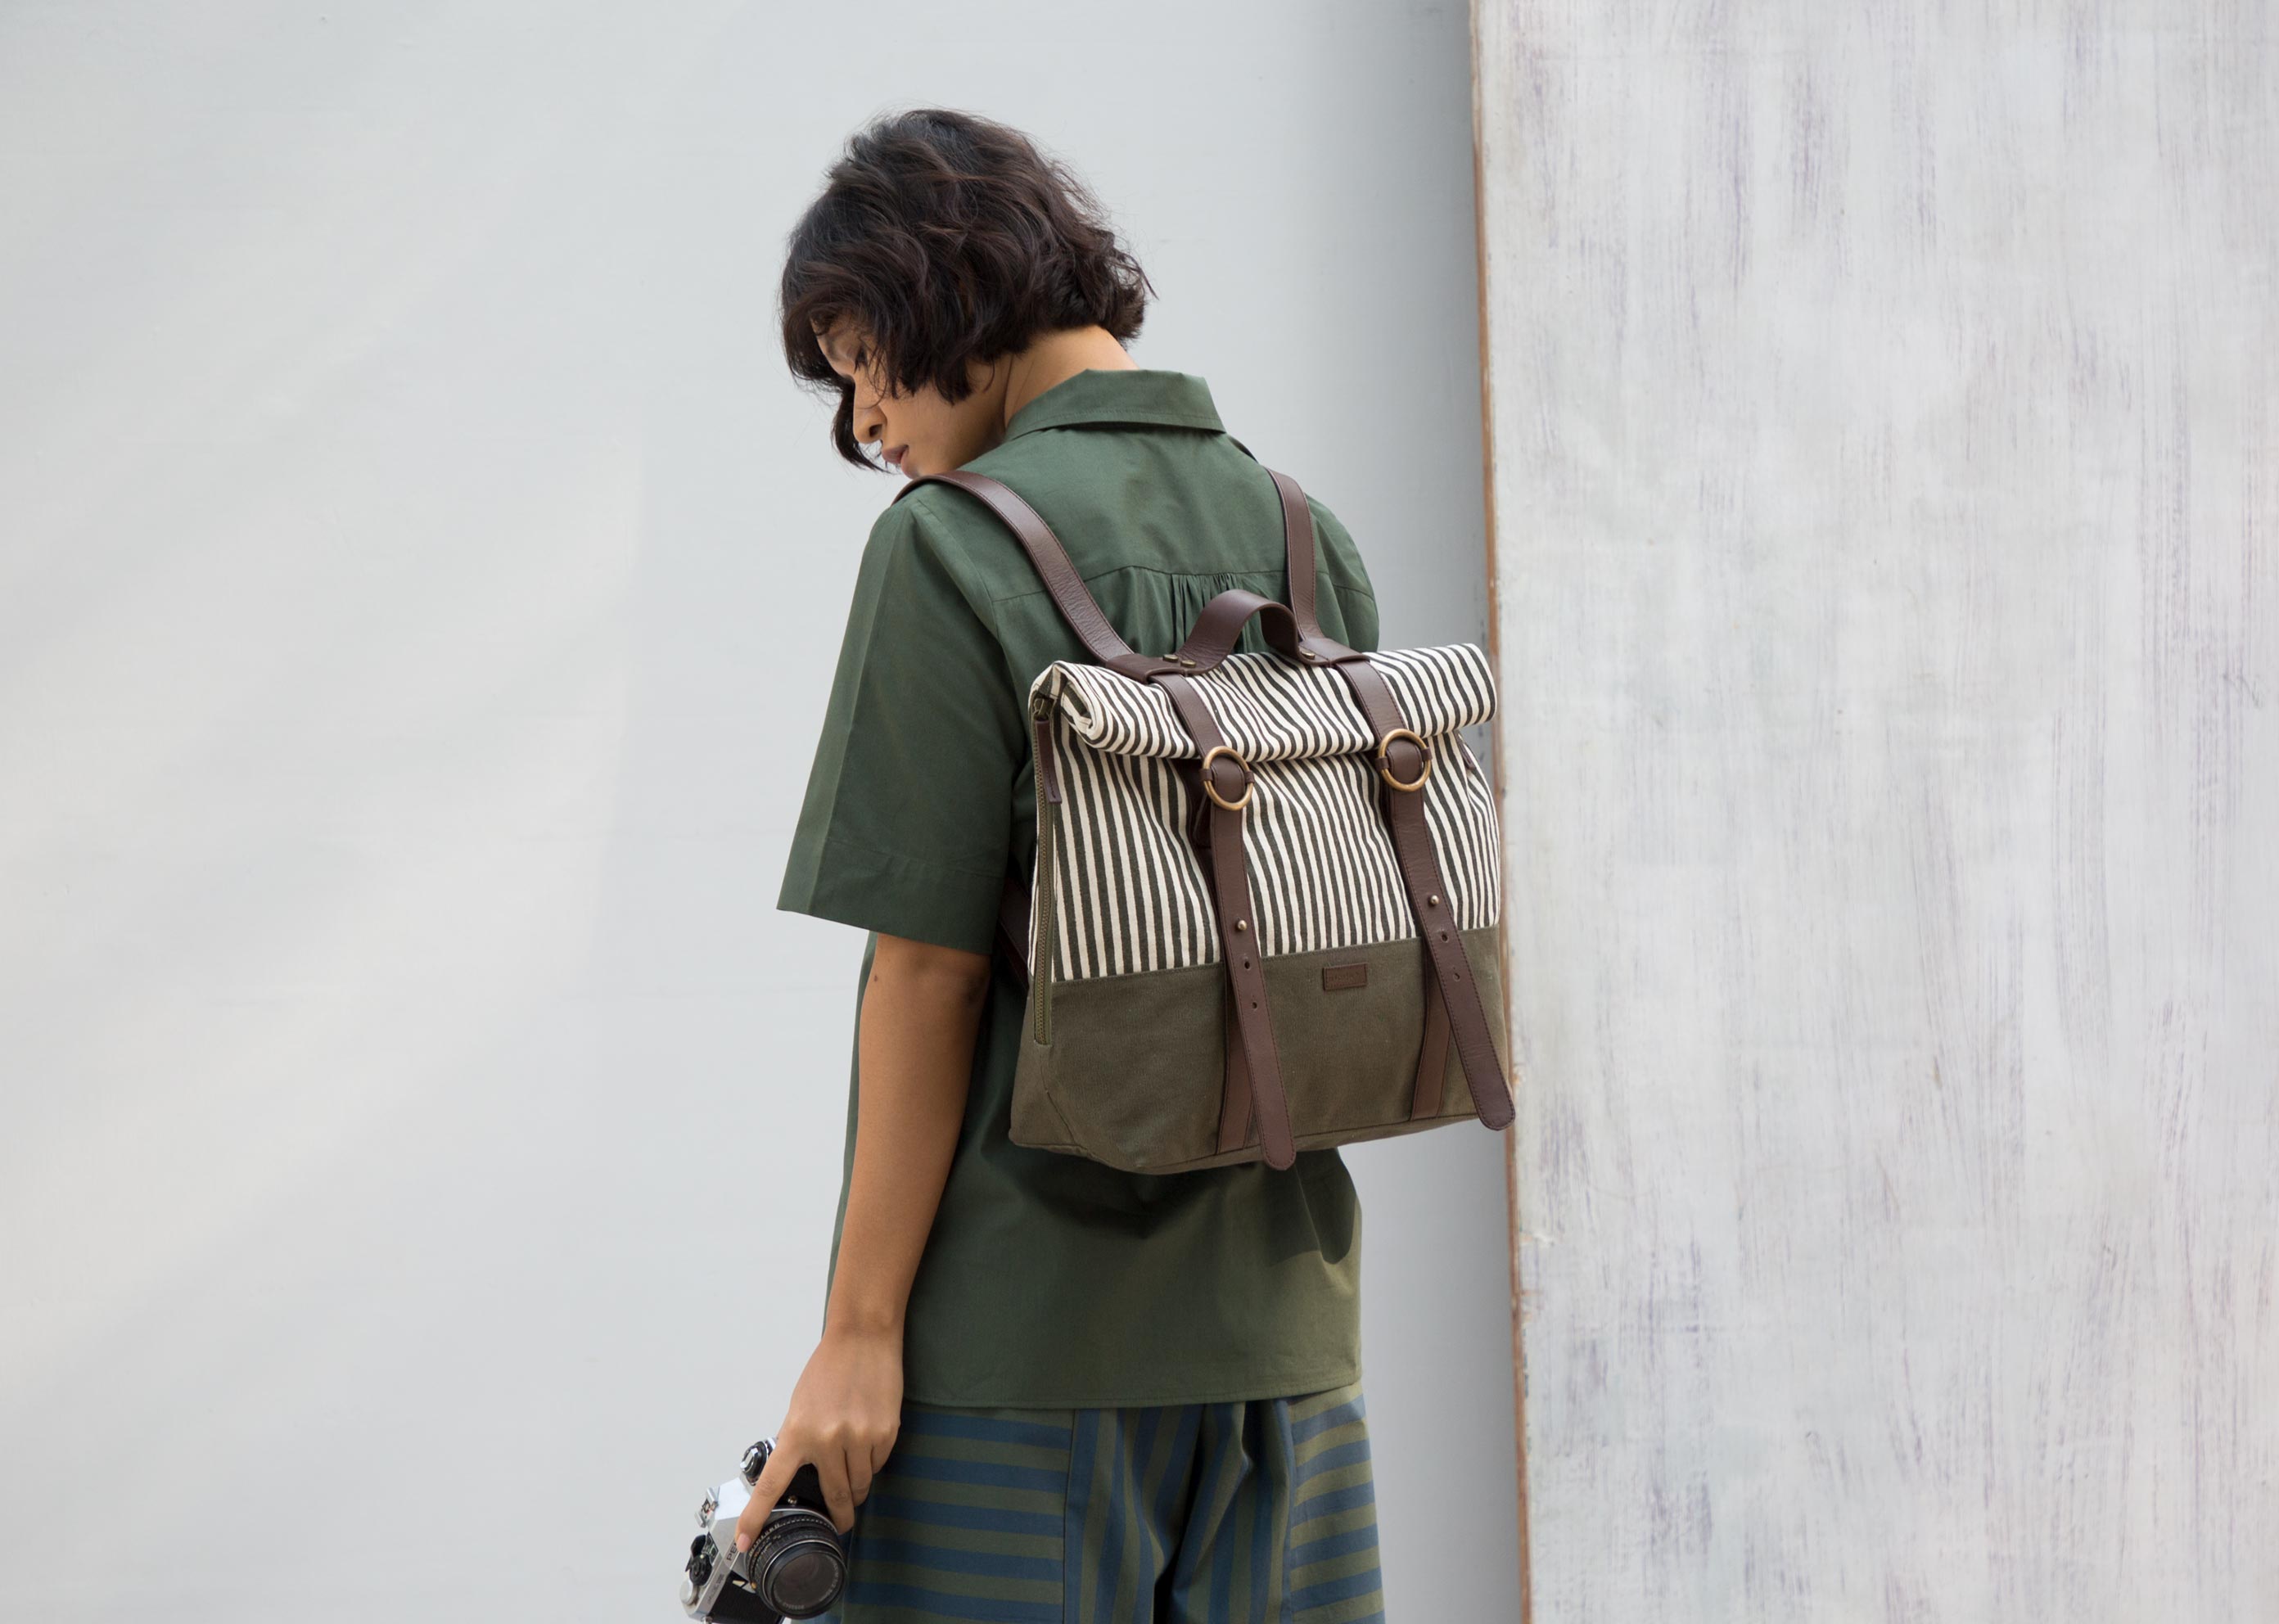 The Foldover Backpack